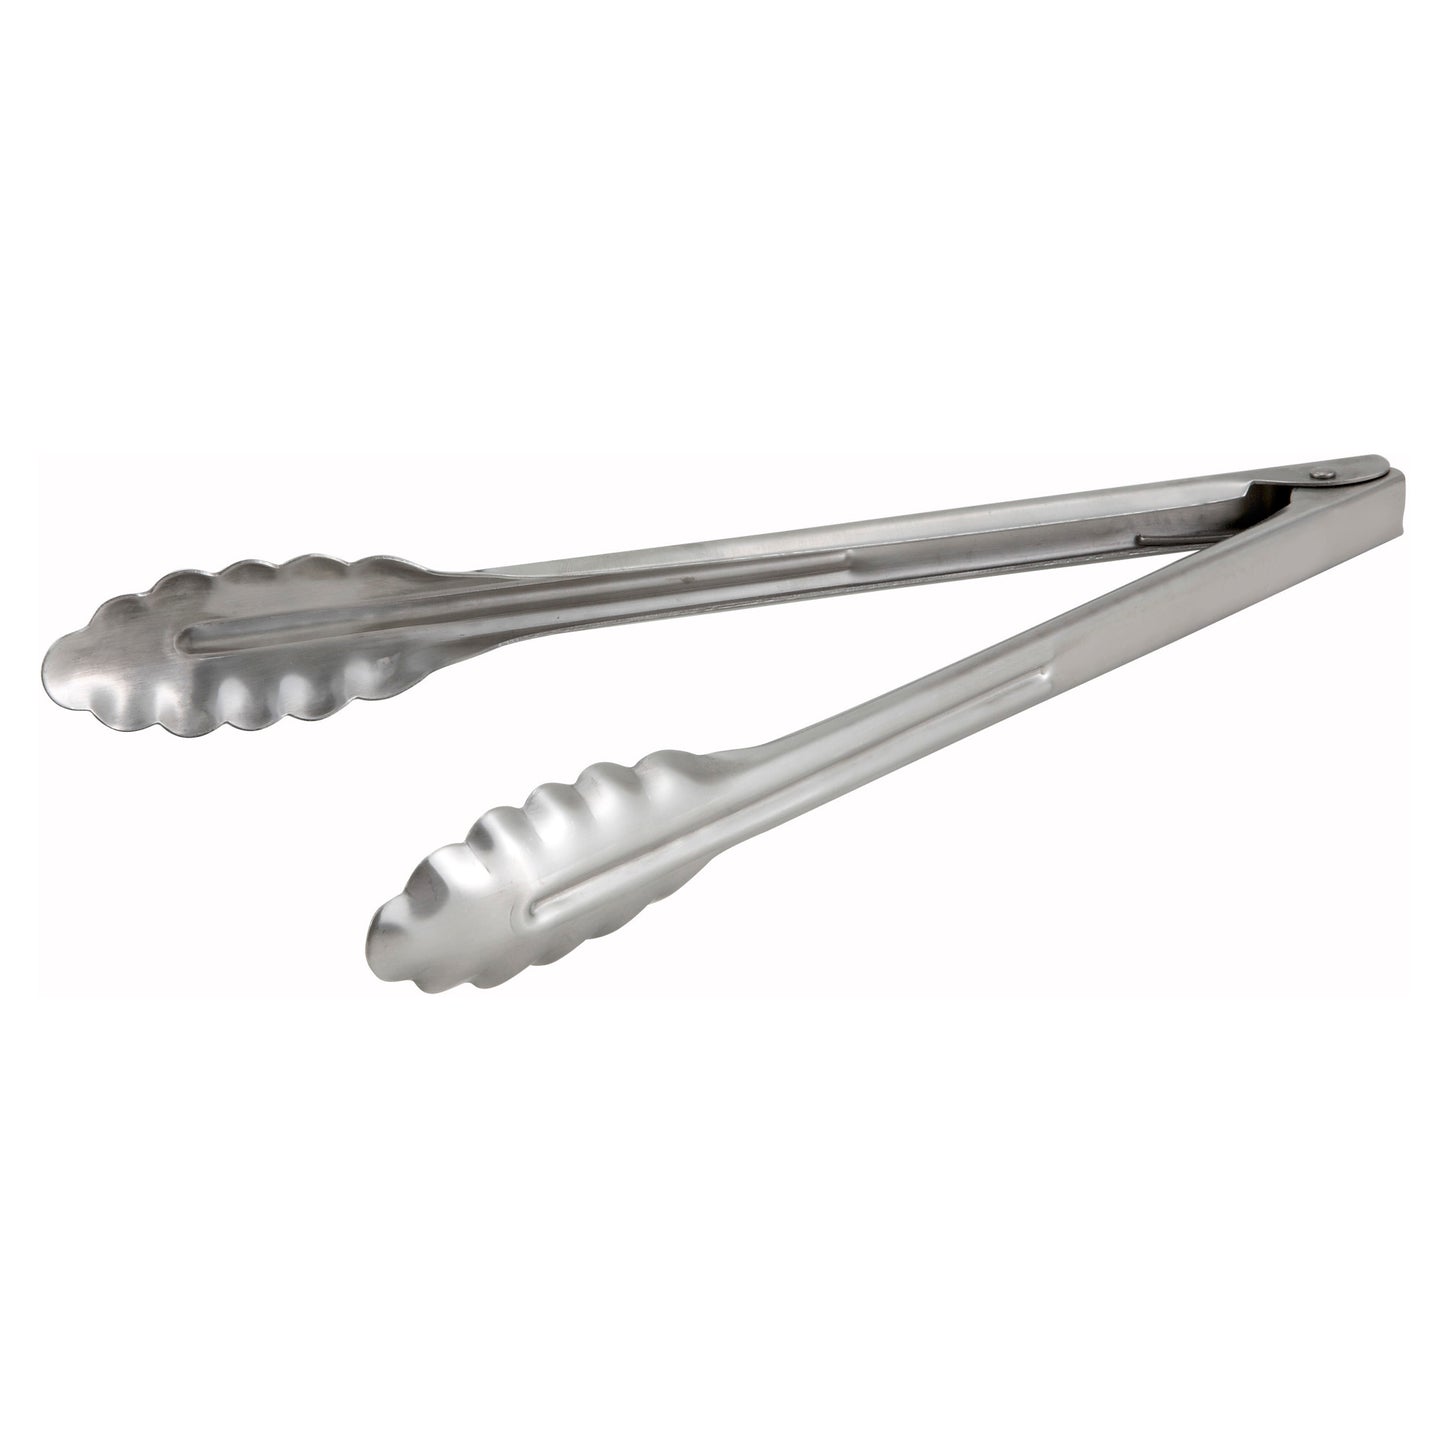 UT-12HT - Stainless Steel Utility Tongs, Extra Heavyweight - 12"